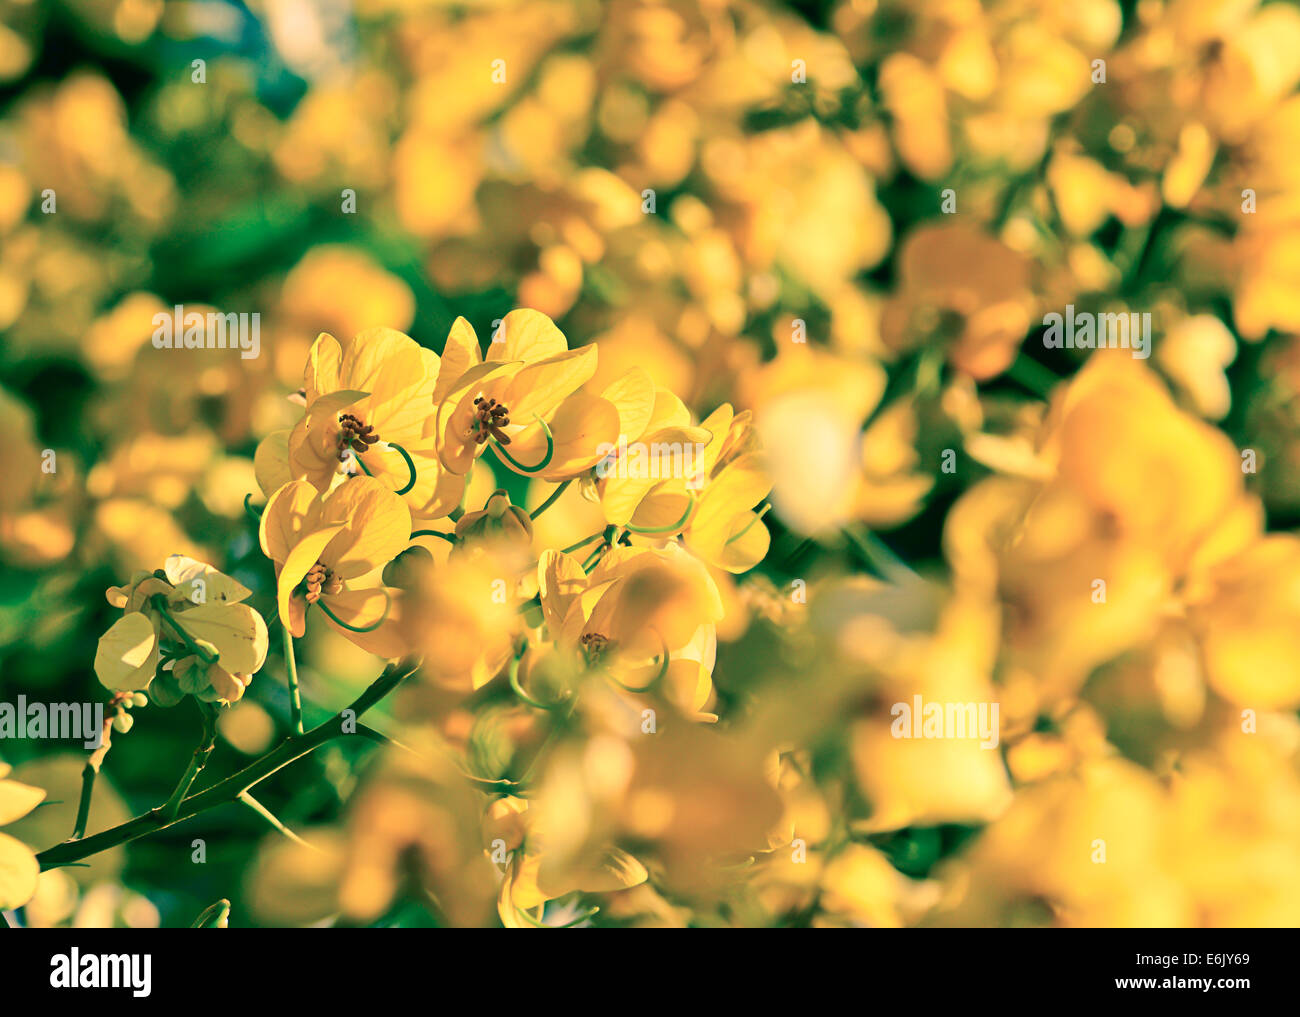 closeup of  yellow  flowers  on tree (Senna siamea Lam)   with vintage filter ;  blur foreground and background Stock Photo